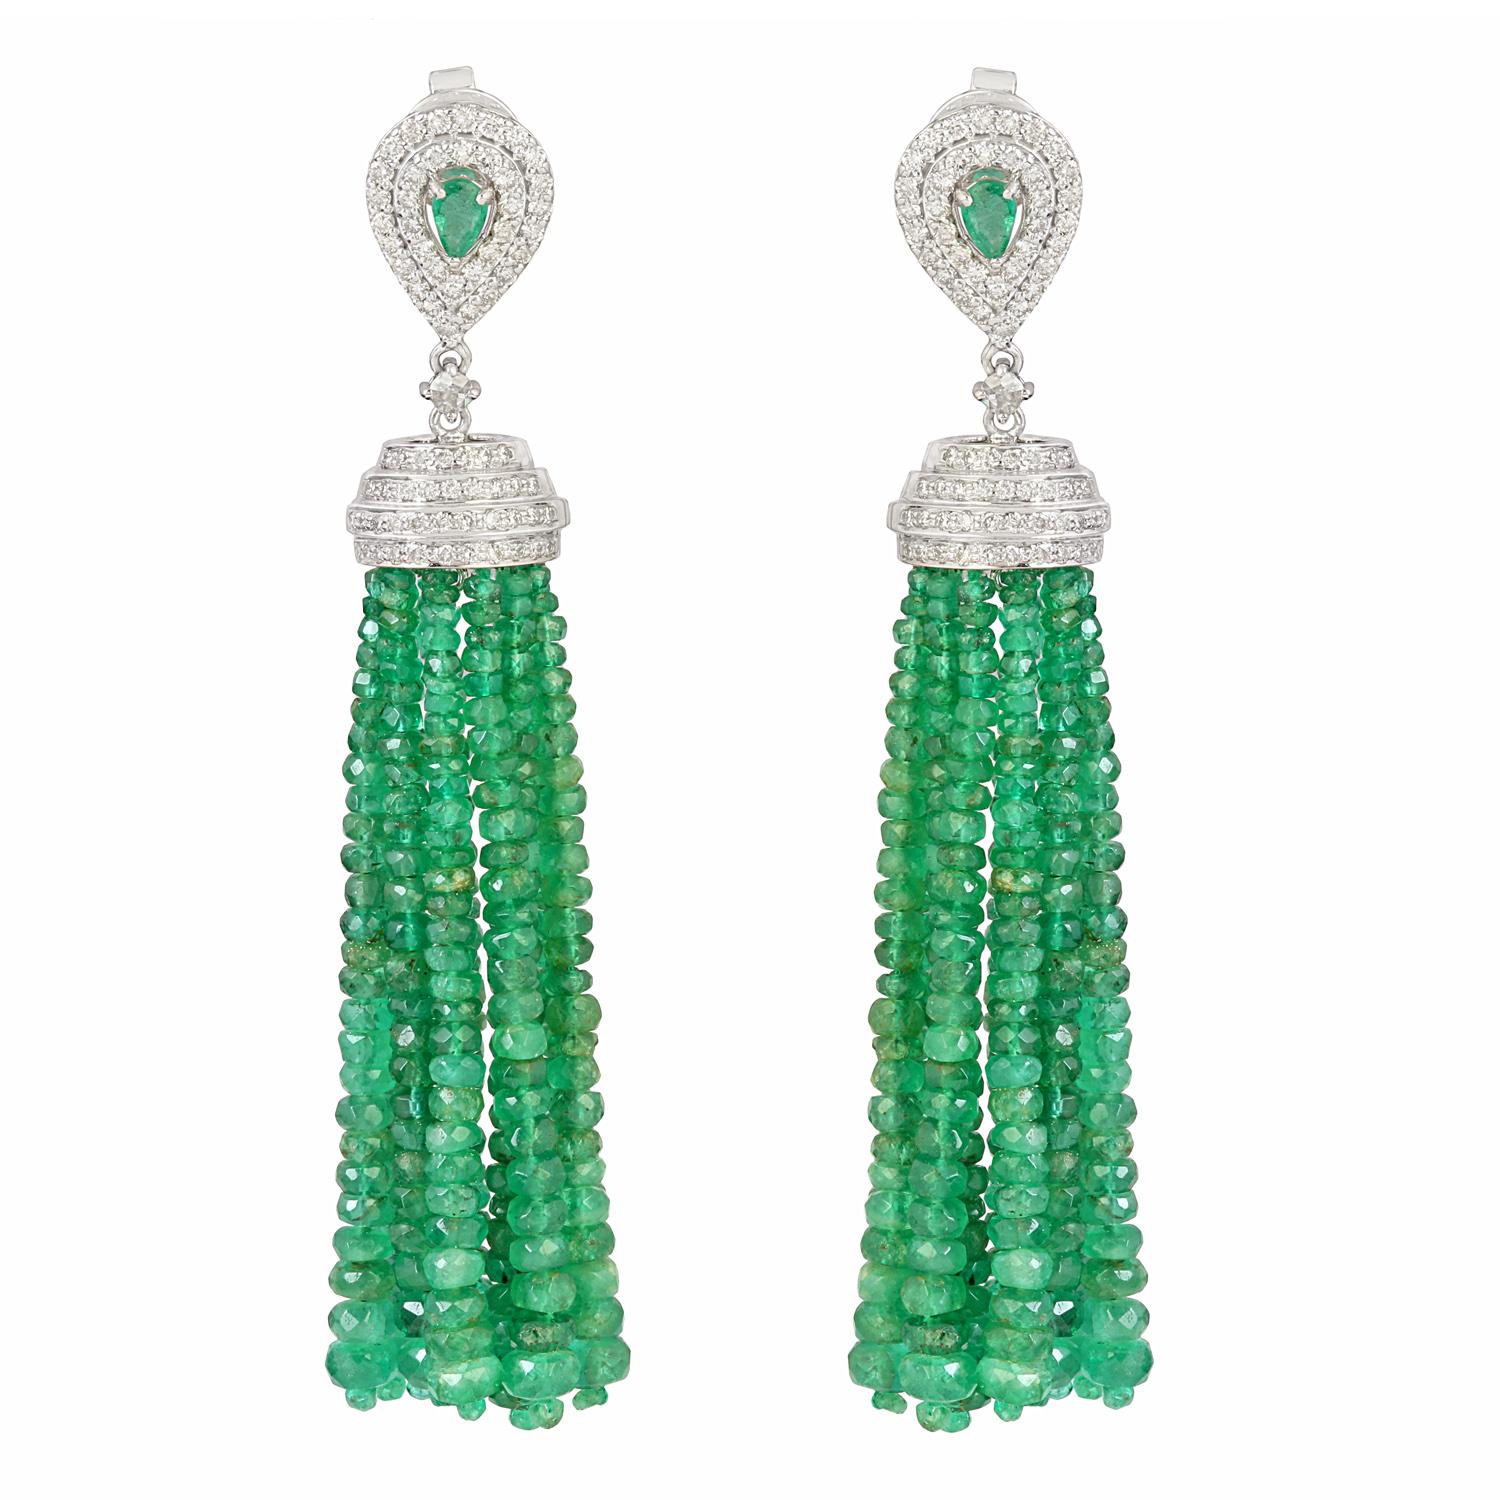 Feast your eyes on these vivid Emerald Gemstone Dangle Earrings encircled by Natural Diamonds. The hook and suspension are made with pure 18K Yellow Gold. Pair yours with everything – these wonders can take you through day and night